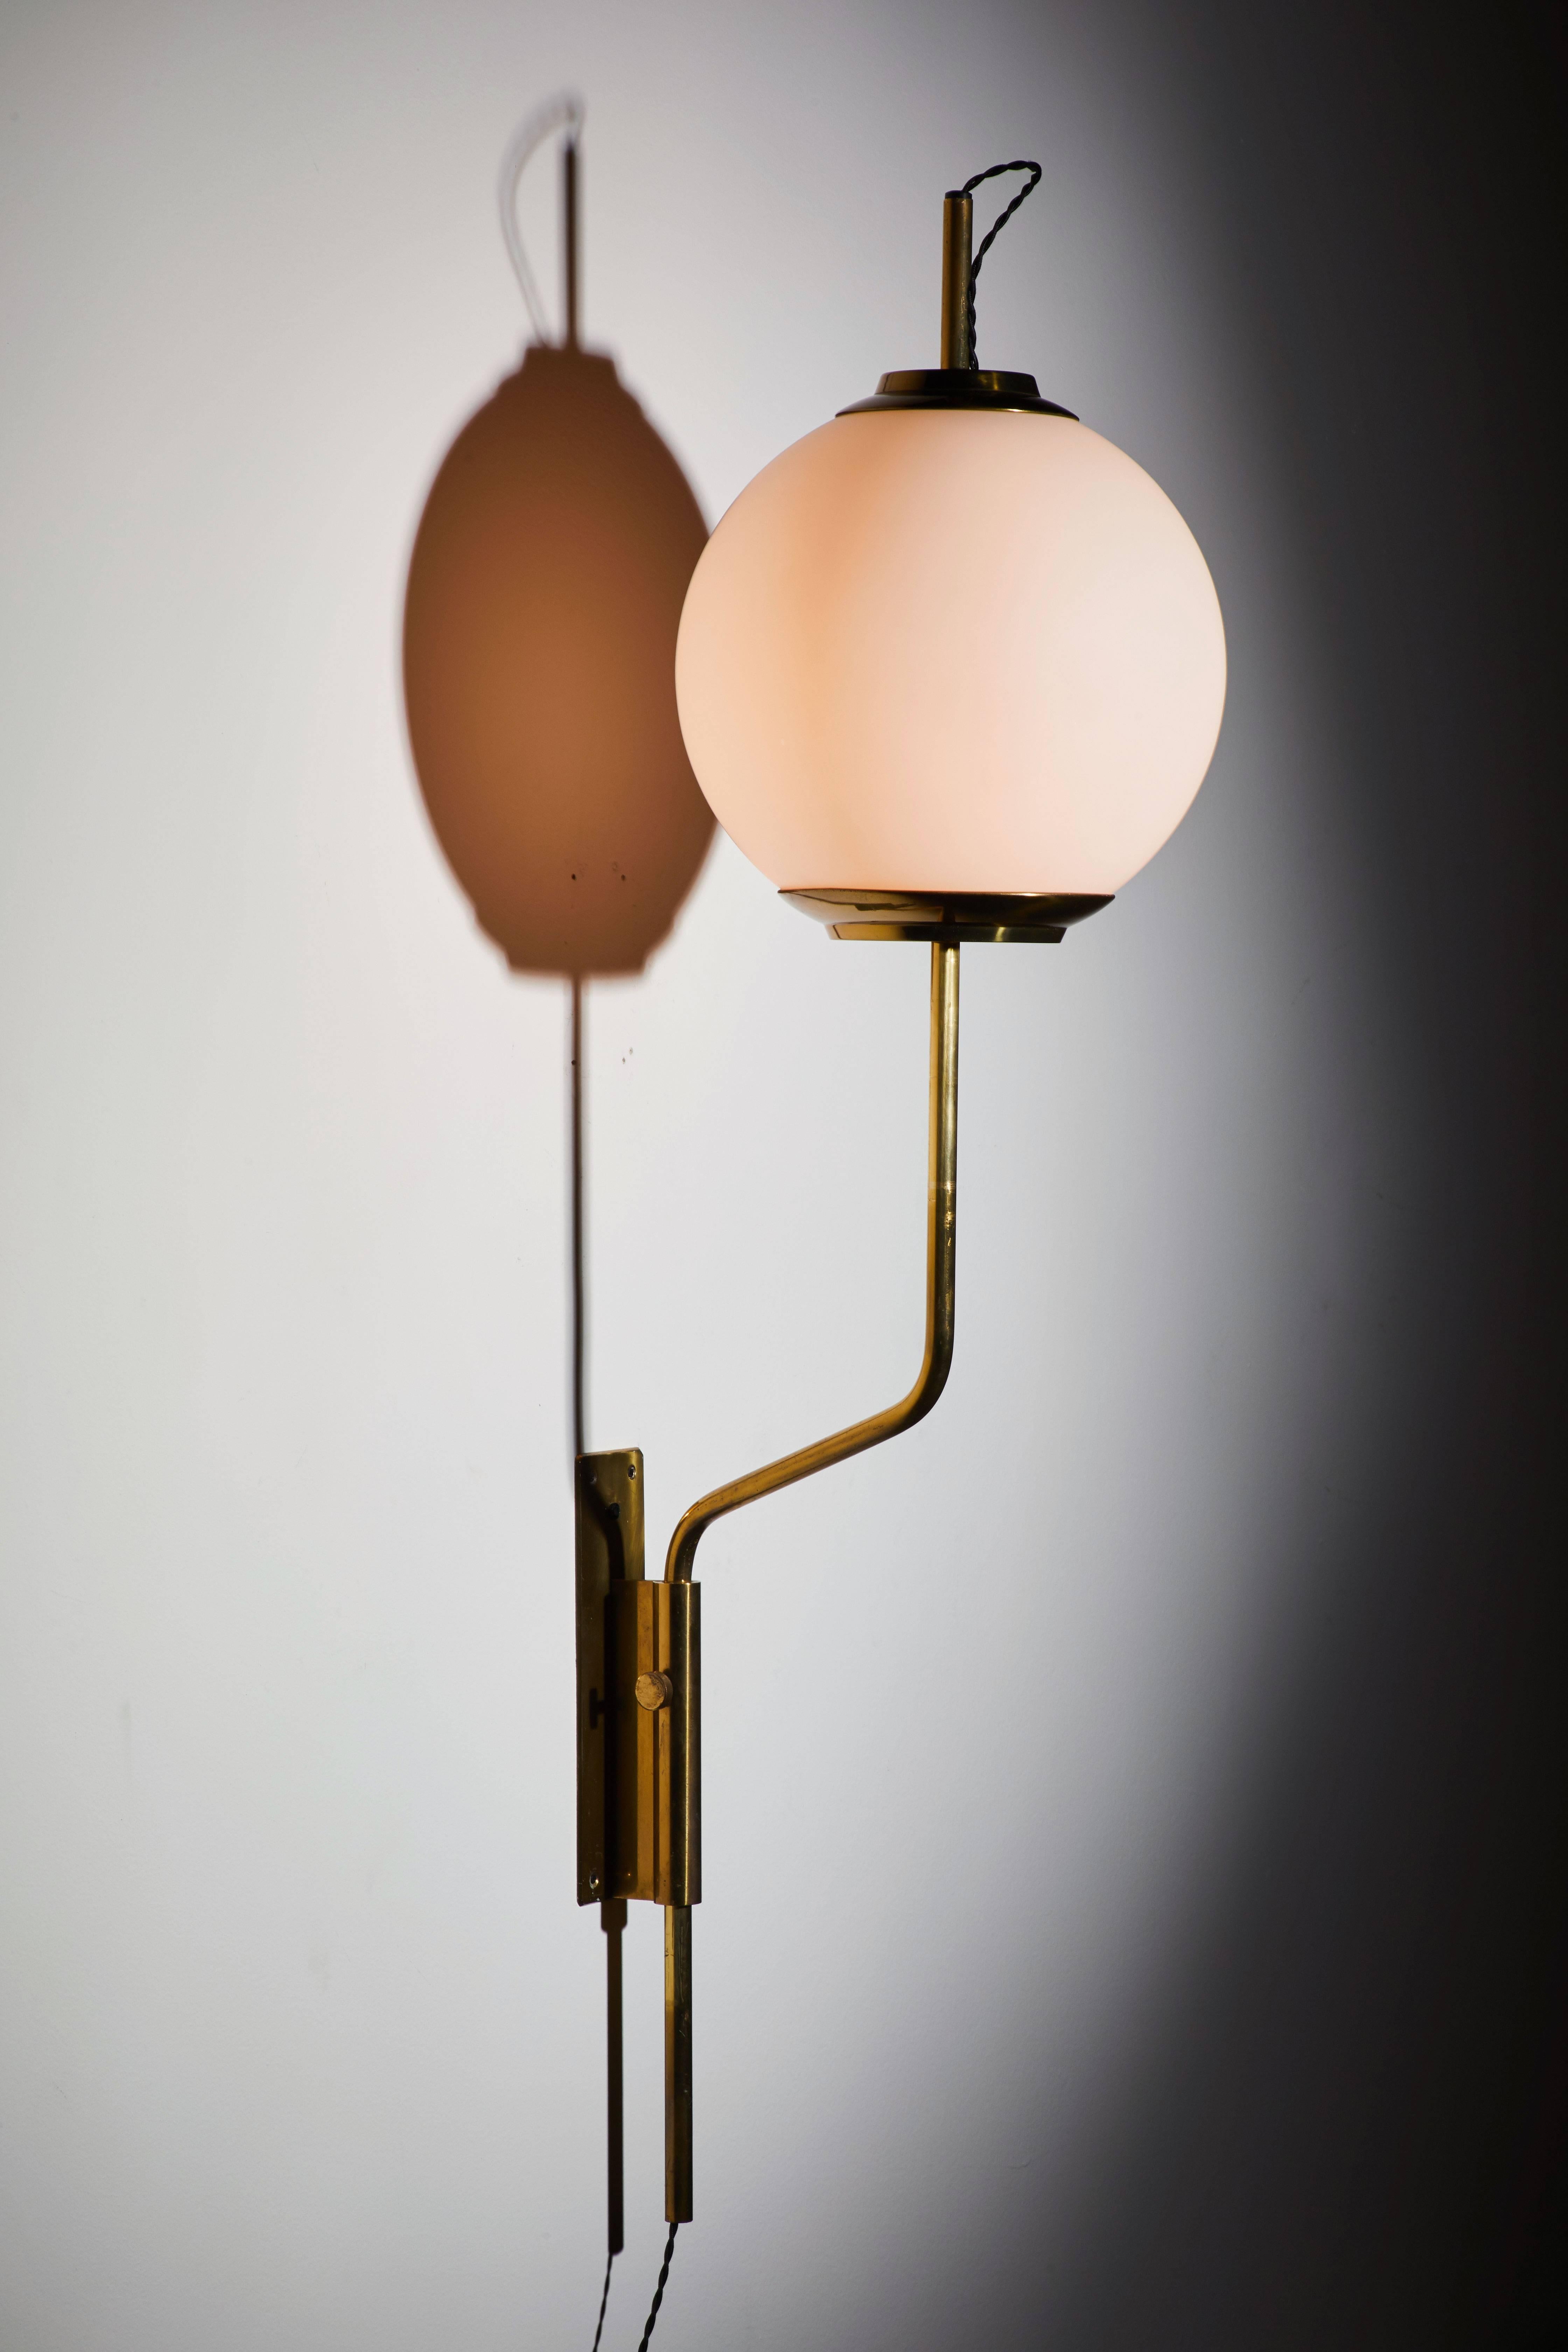 Mid-20th Century Pair of Model Lp11 Pallone Wall Lights by Luigi Caccia Dominioni for Azucena